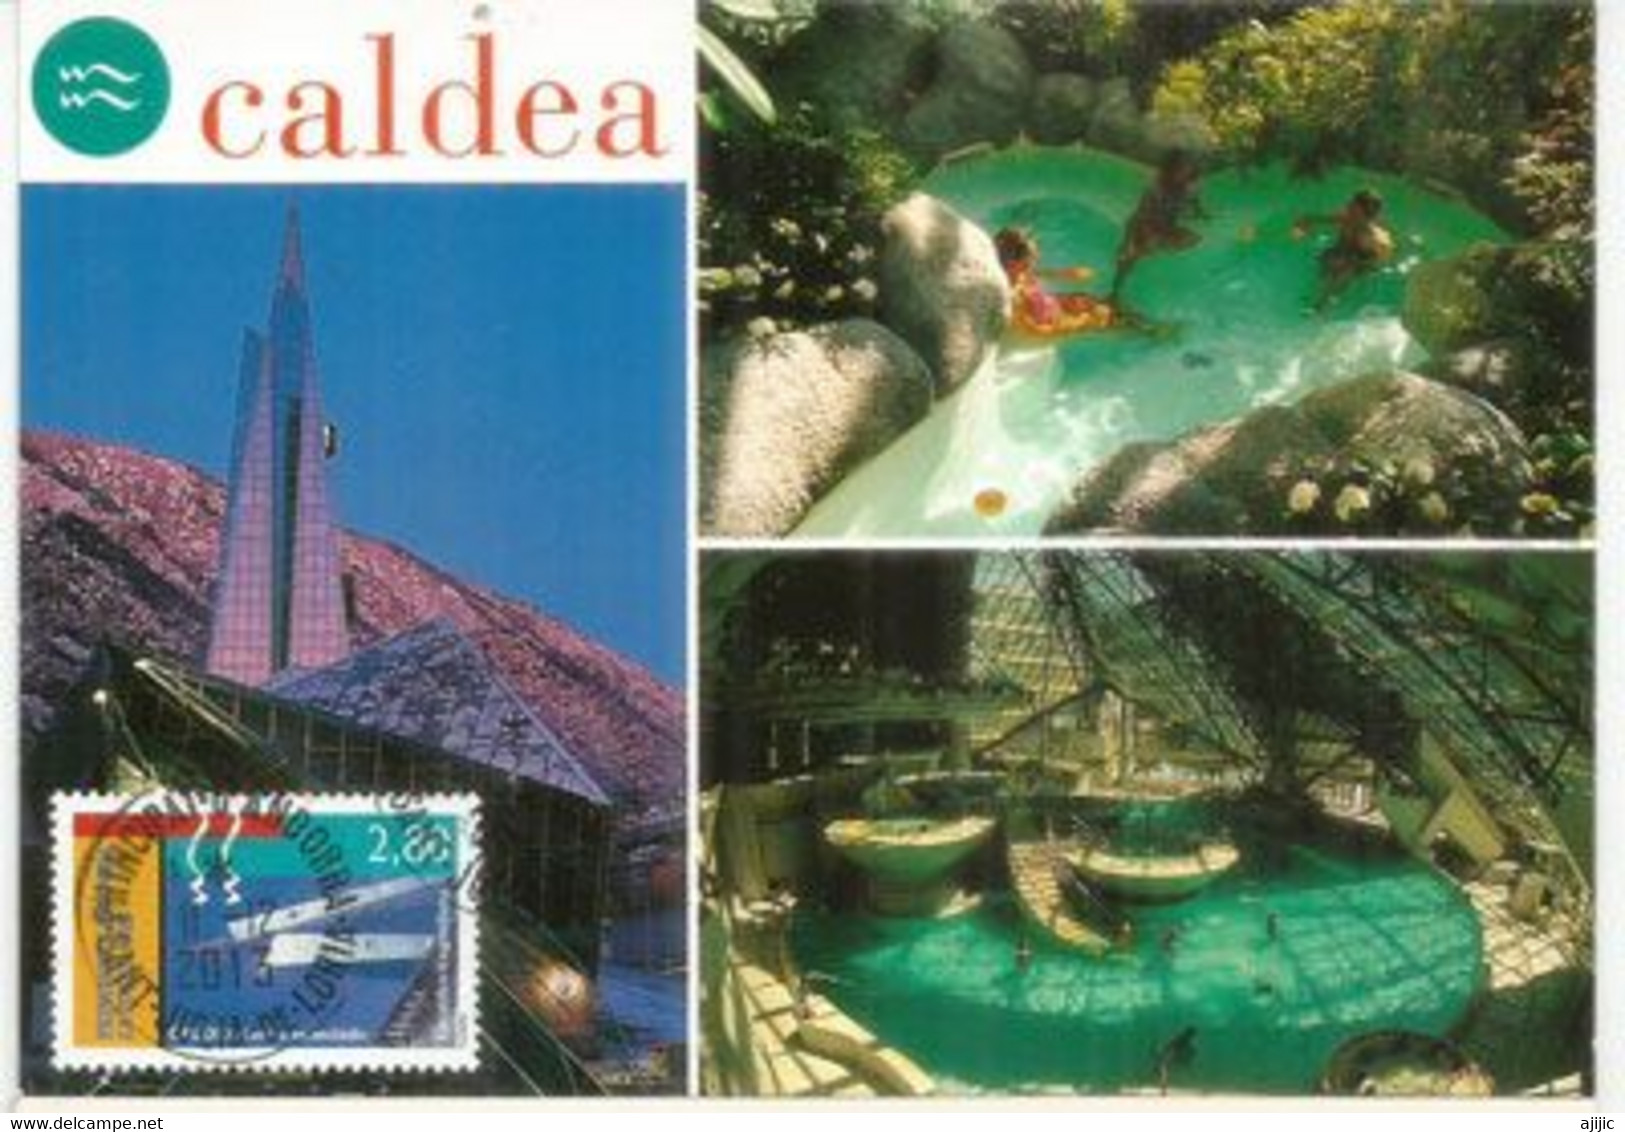 Caldea Spa Resort In Escaldes-Engordany, Andorra. (Europe's Largest Spa)  Maximum-Card,oblitération 2013 - Covers & Documents